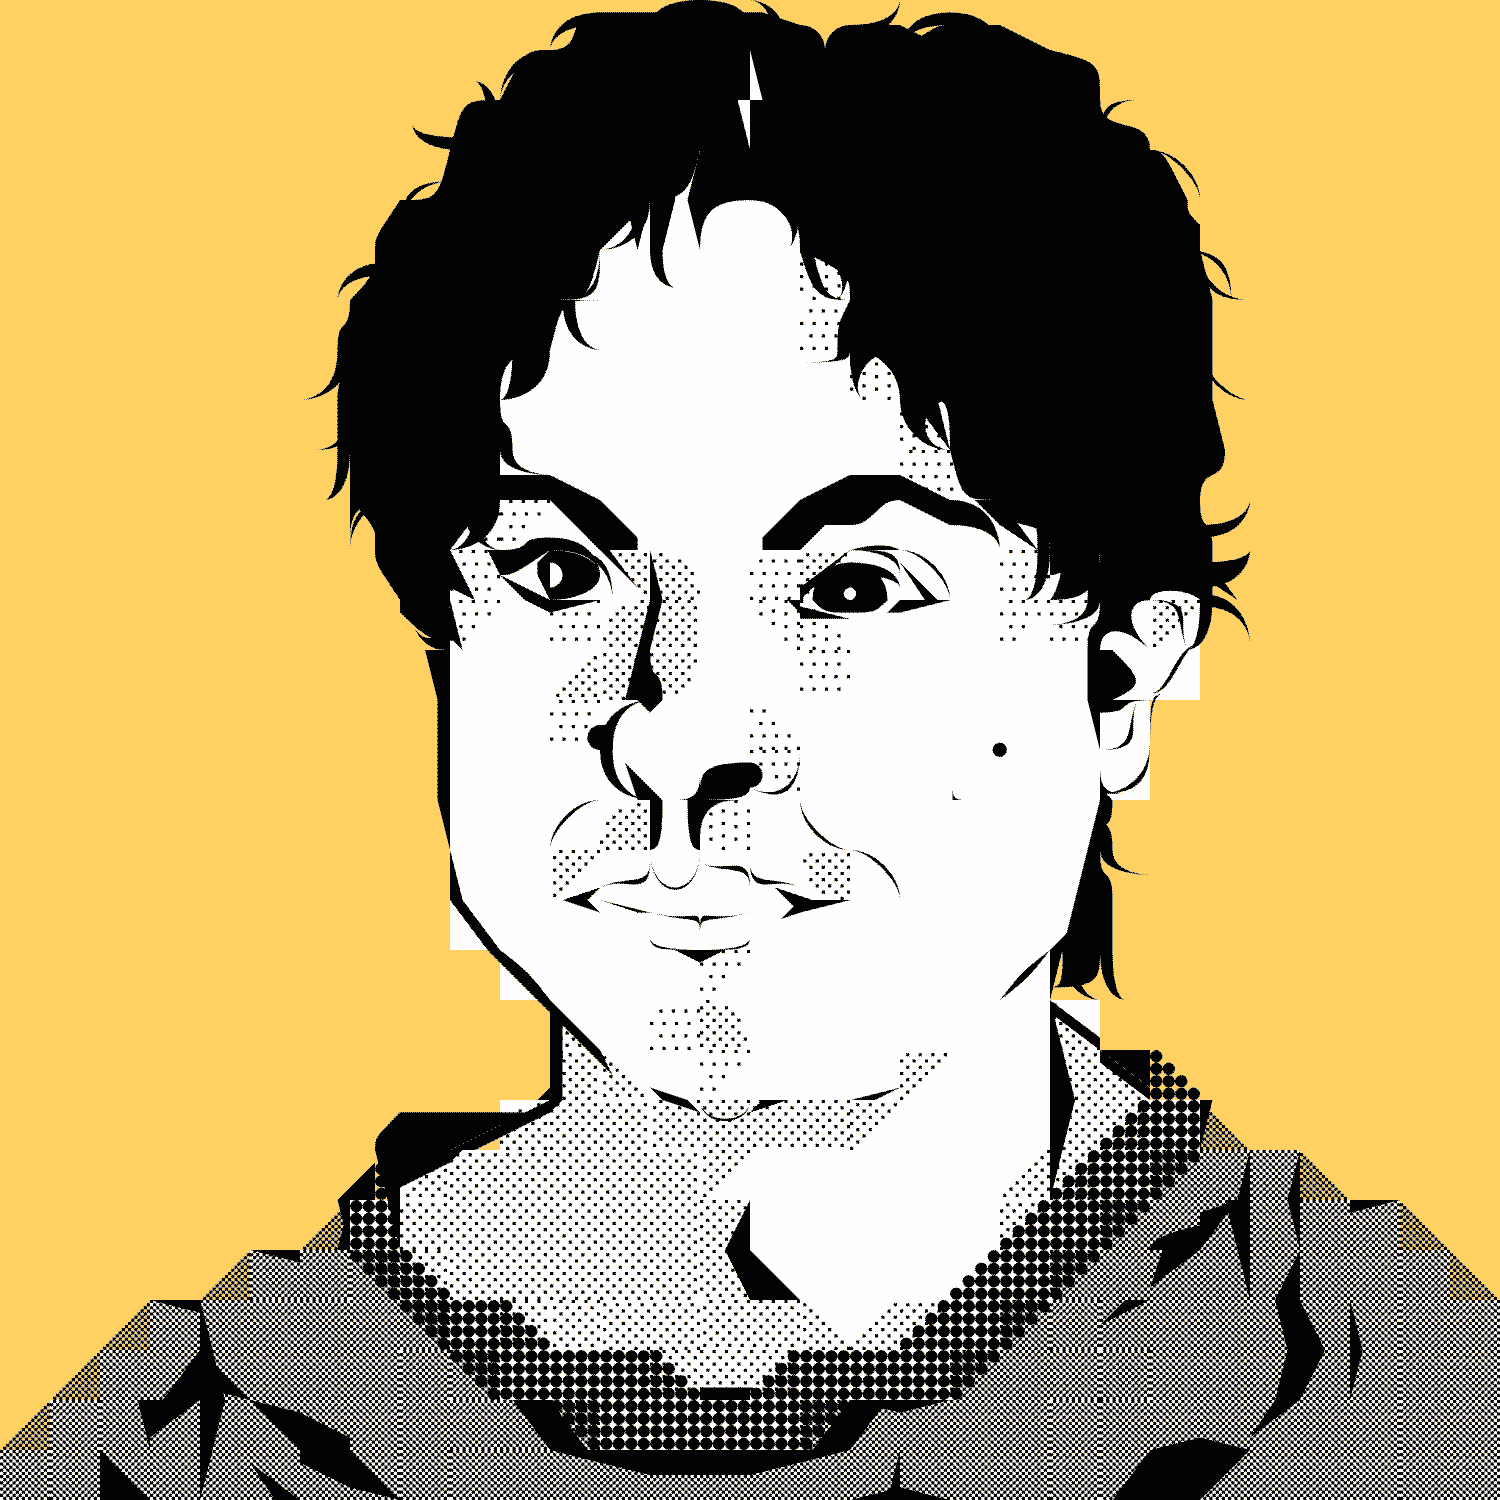 a black and white illustration of a person. The background is
                    a solid yellow color.